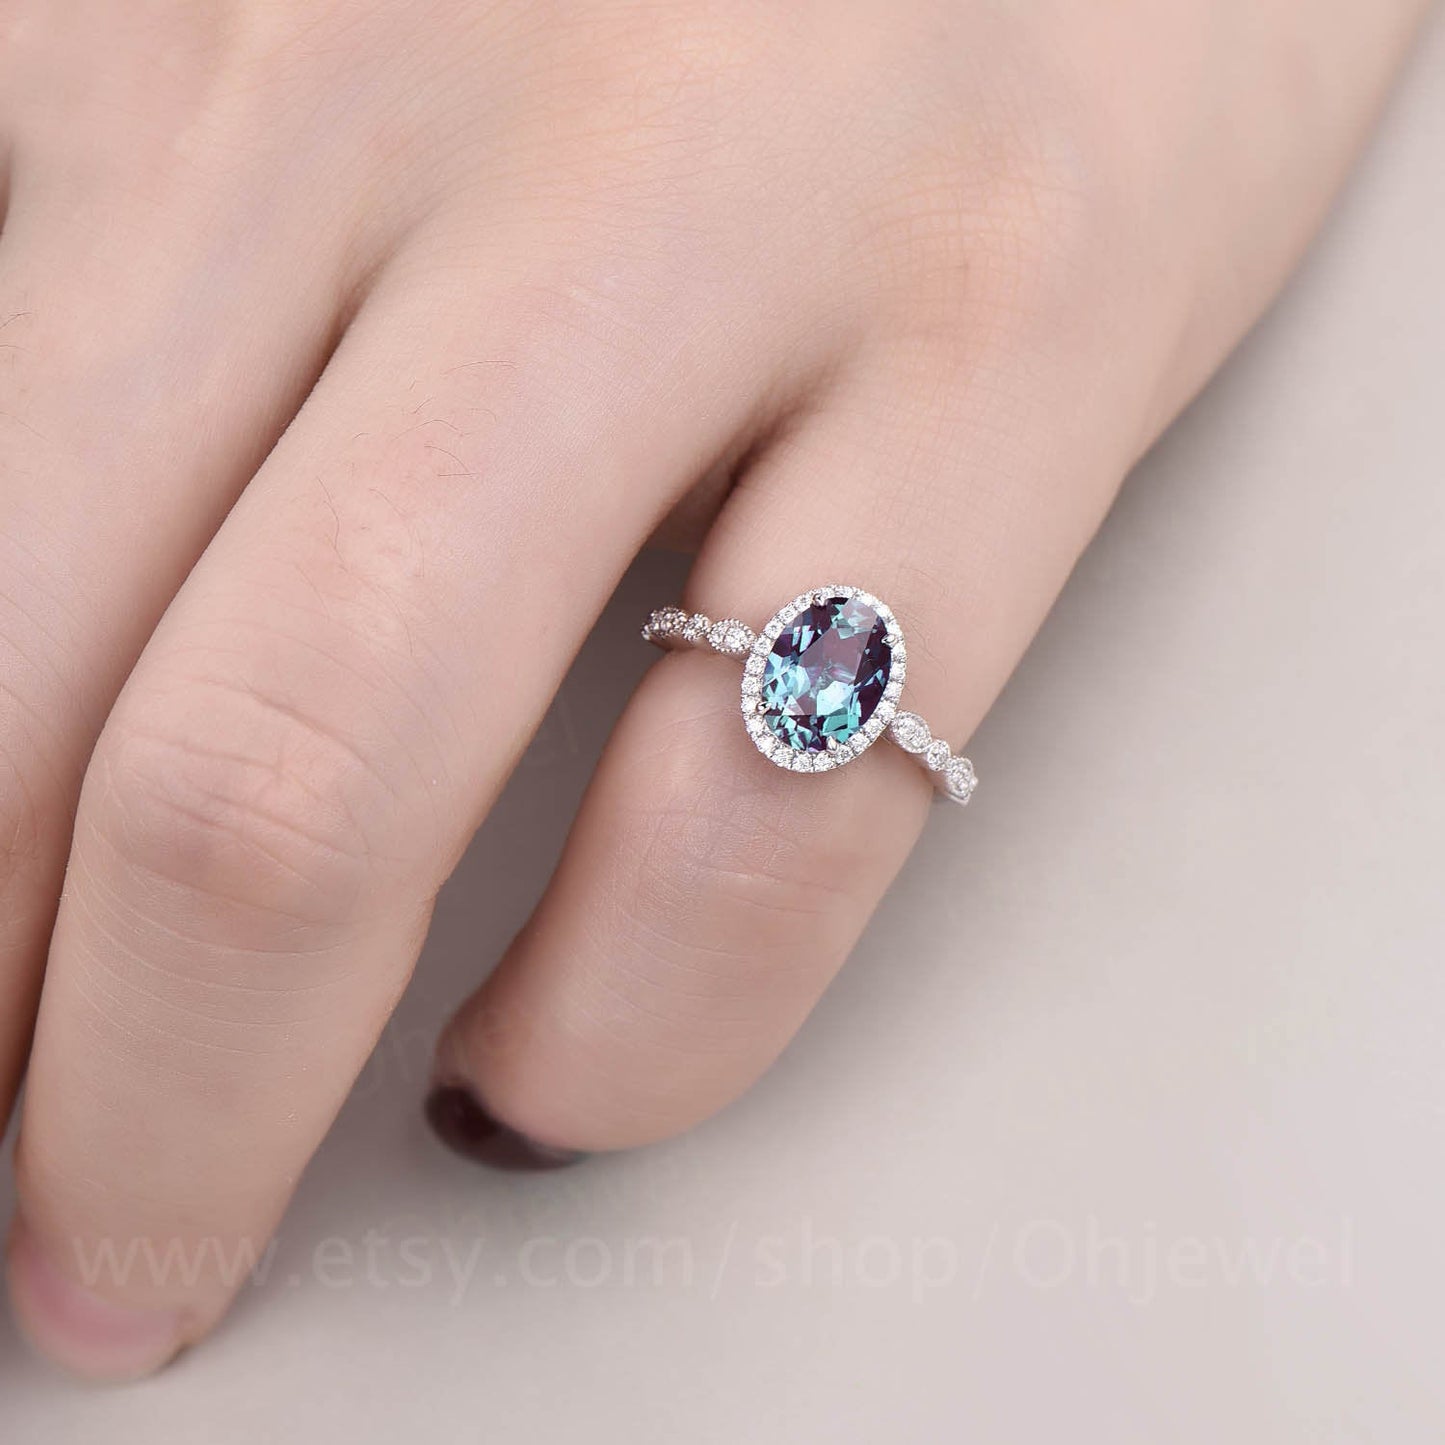 Custom order for Aadam Bhatti-6x8mm oval alexandrite ring diamond ring with 18k white +Dainty round opal alexandrite wedding band with 925 sterling silver